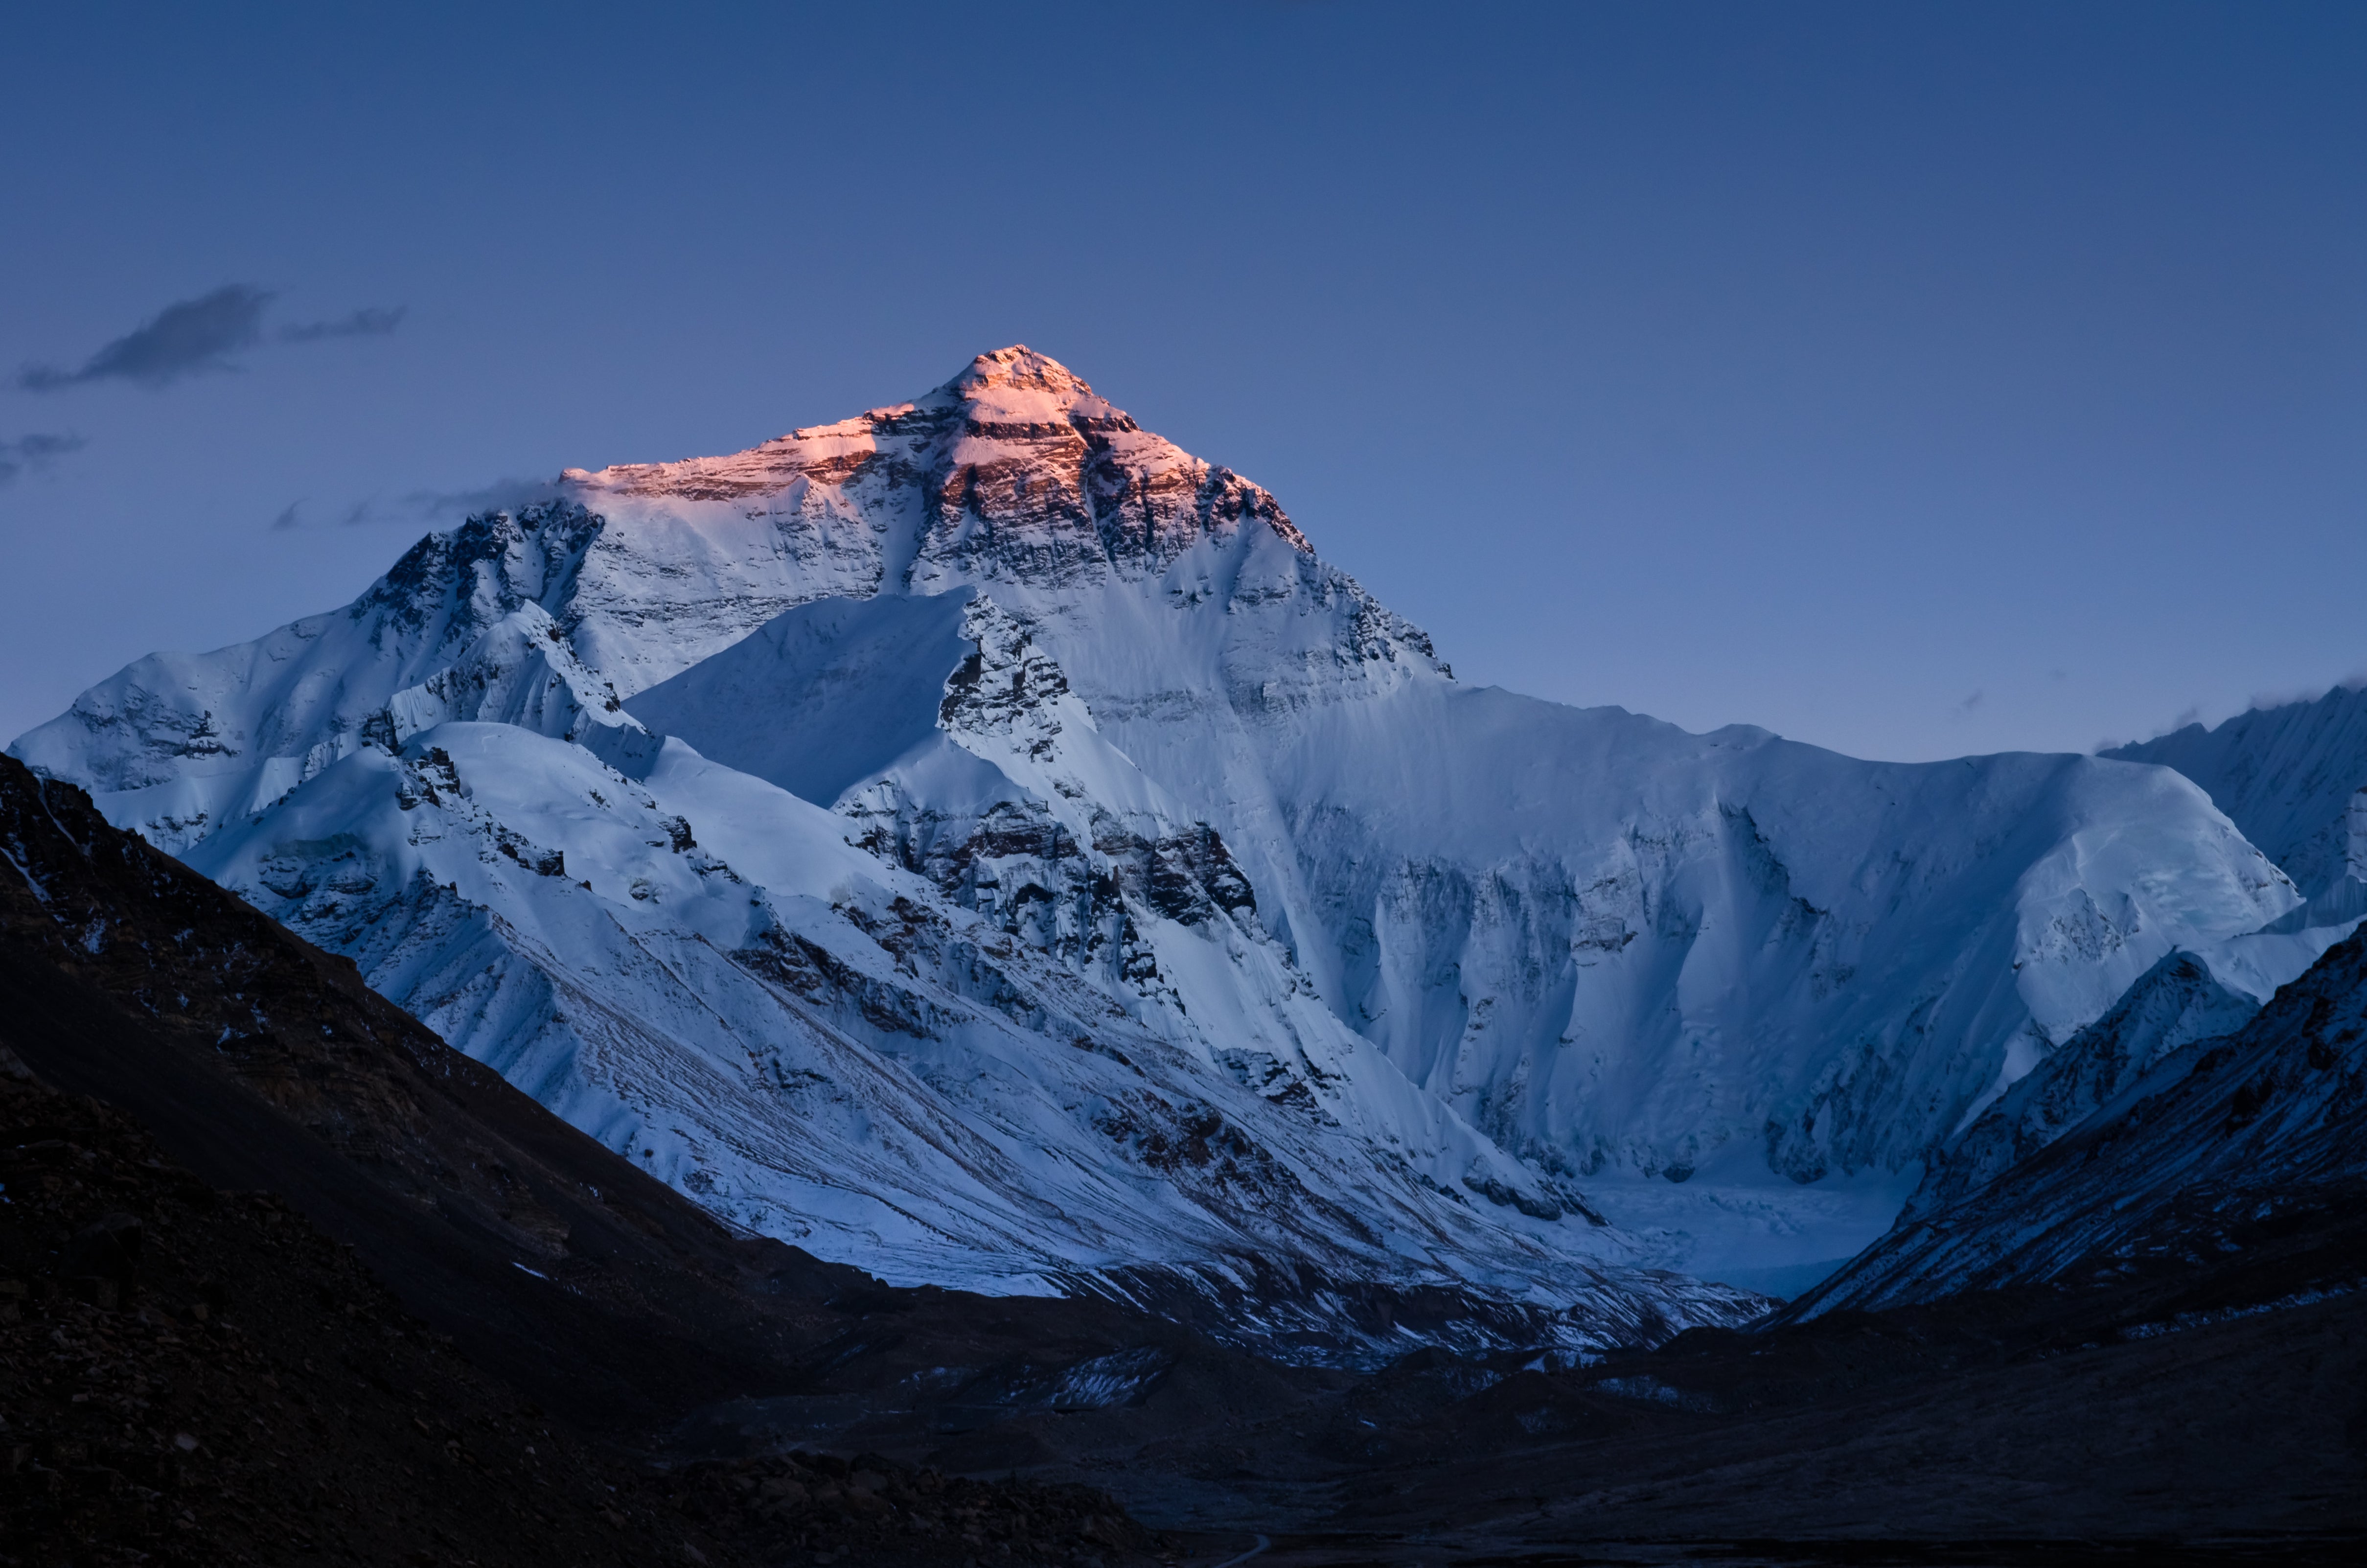 Microplastics have been discovered at their highest point on Earth, near the summit of Mount Everest